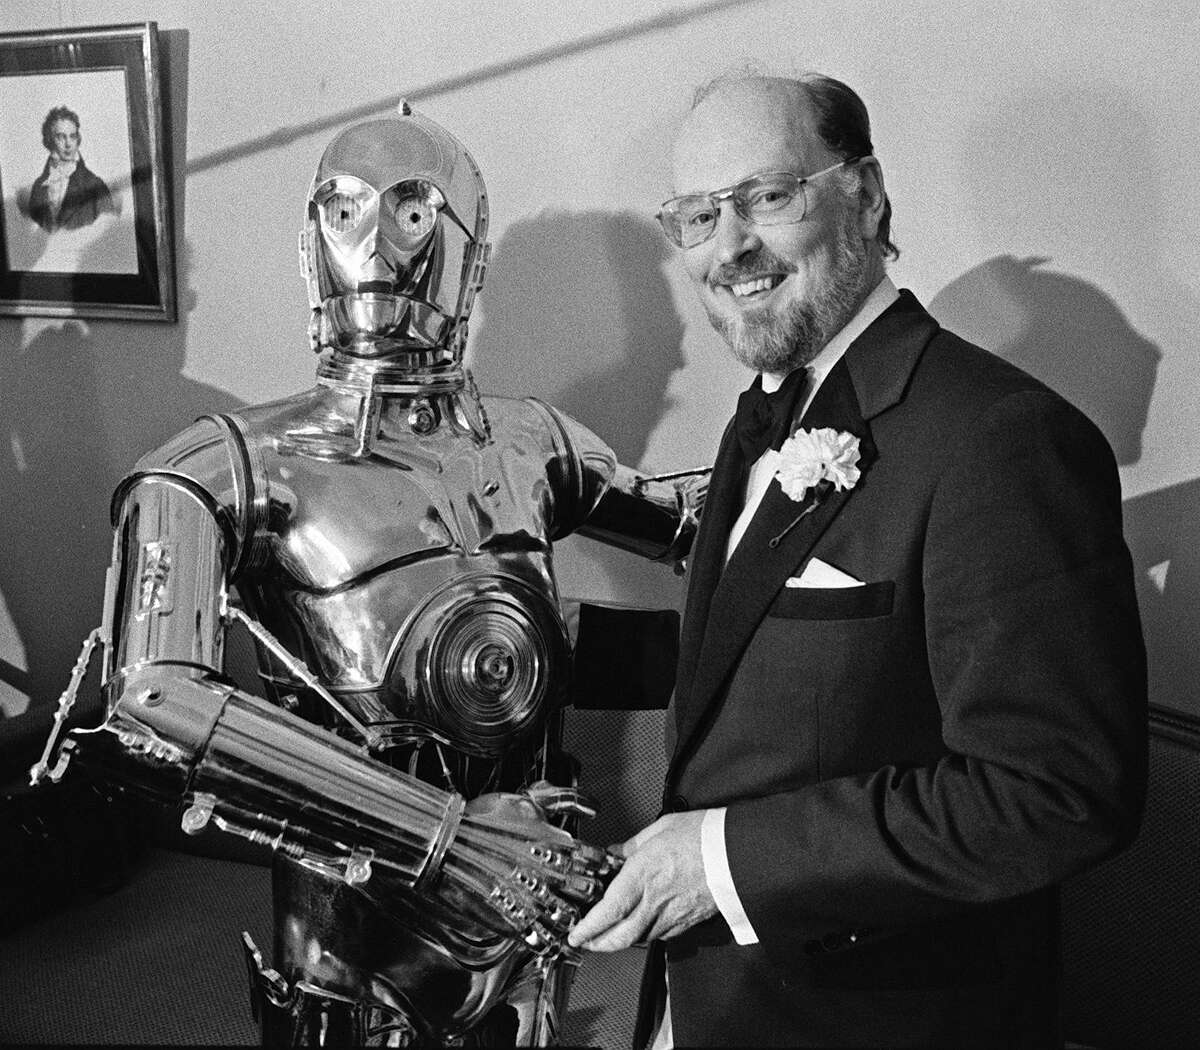 ** FILE **Boston Pops conductor John Williams, right, shakes hands with "Star Wars" character C-3PO at a news conference in this April 30, 1980 file photo, in Boston. When Williams started working with producer George Lucas on "Star Wars," America was celebrating its bicentennial. The composer was 44, balding with dark hair around the sides and graying beard. The five-time Oscar winner is now 73, with white hair and beard, but the force is still with him. (AP Photo/FILES)